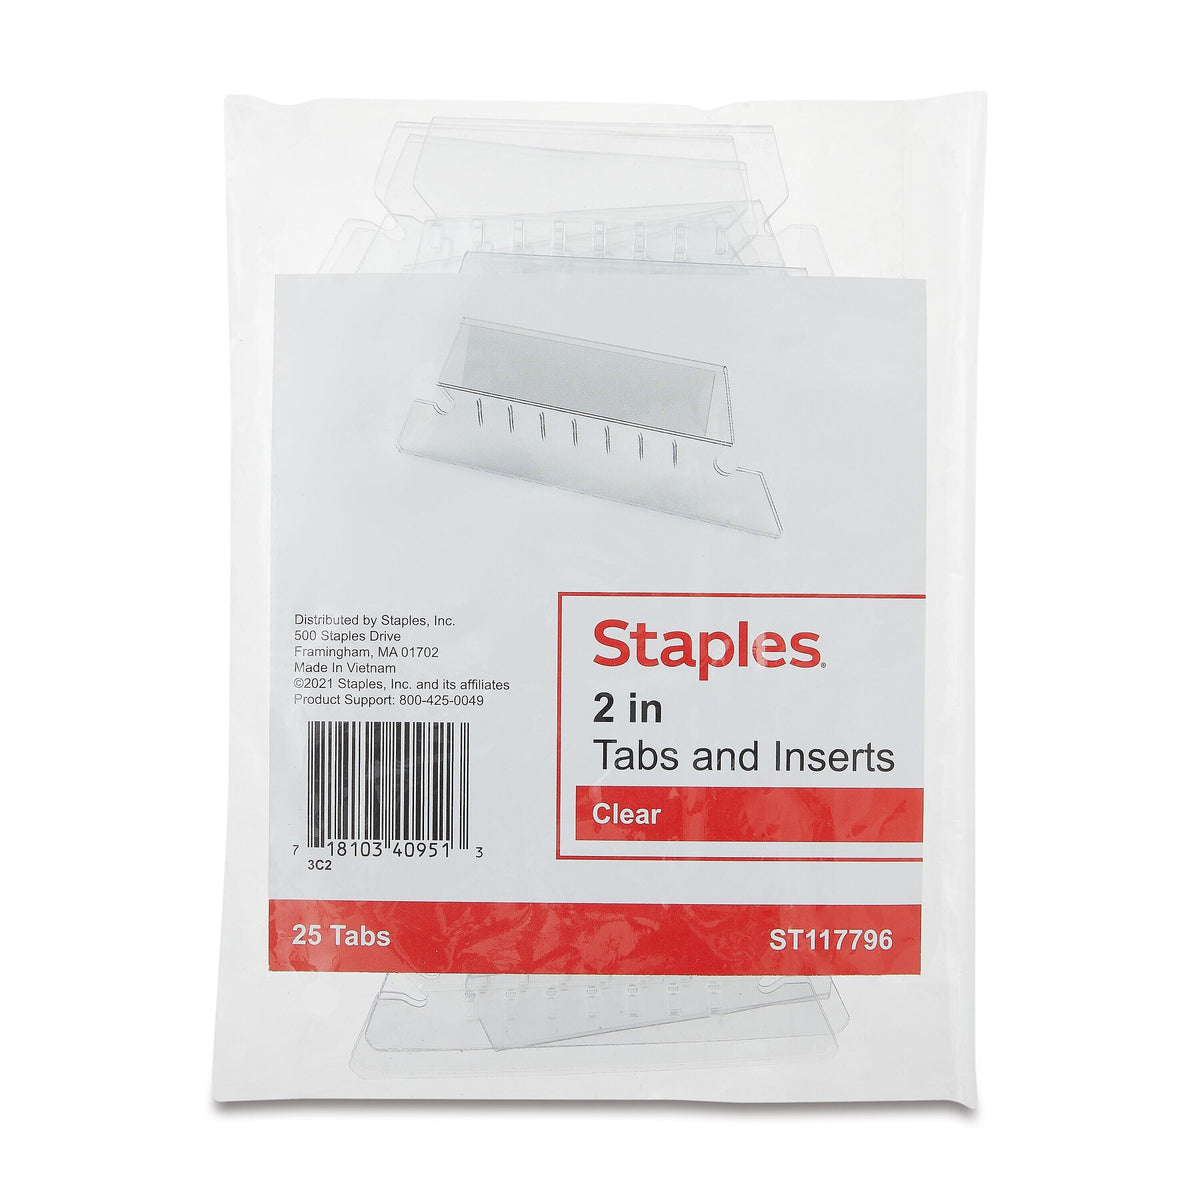 Staples® Hanging File Folder Tabs, Clear, 25/Pack